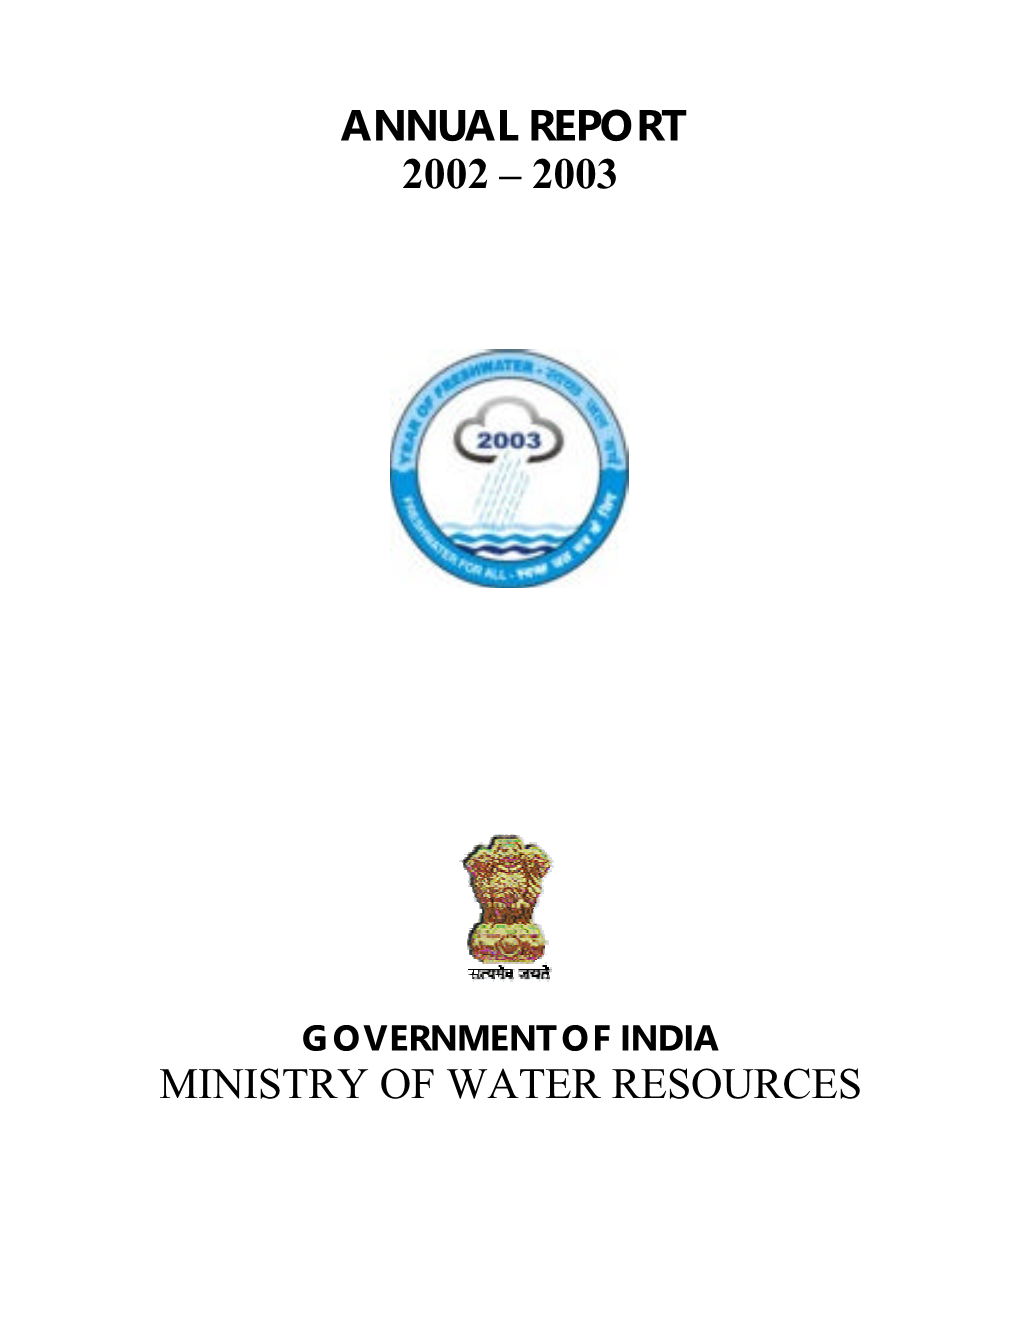 Annual Report 2002 – 2003 Ministry of Water Resources